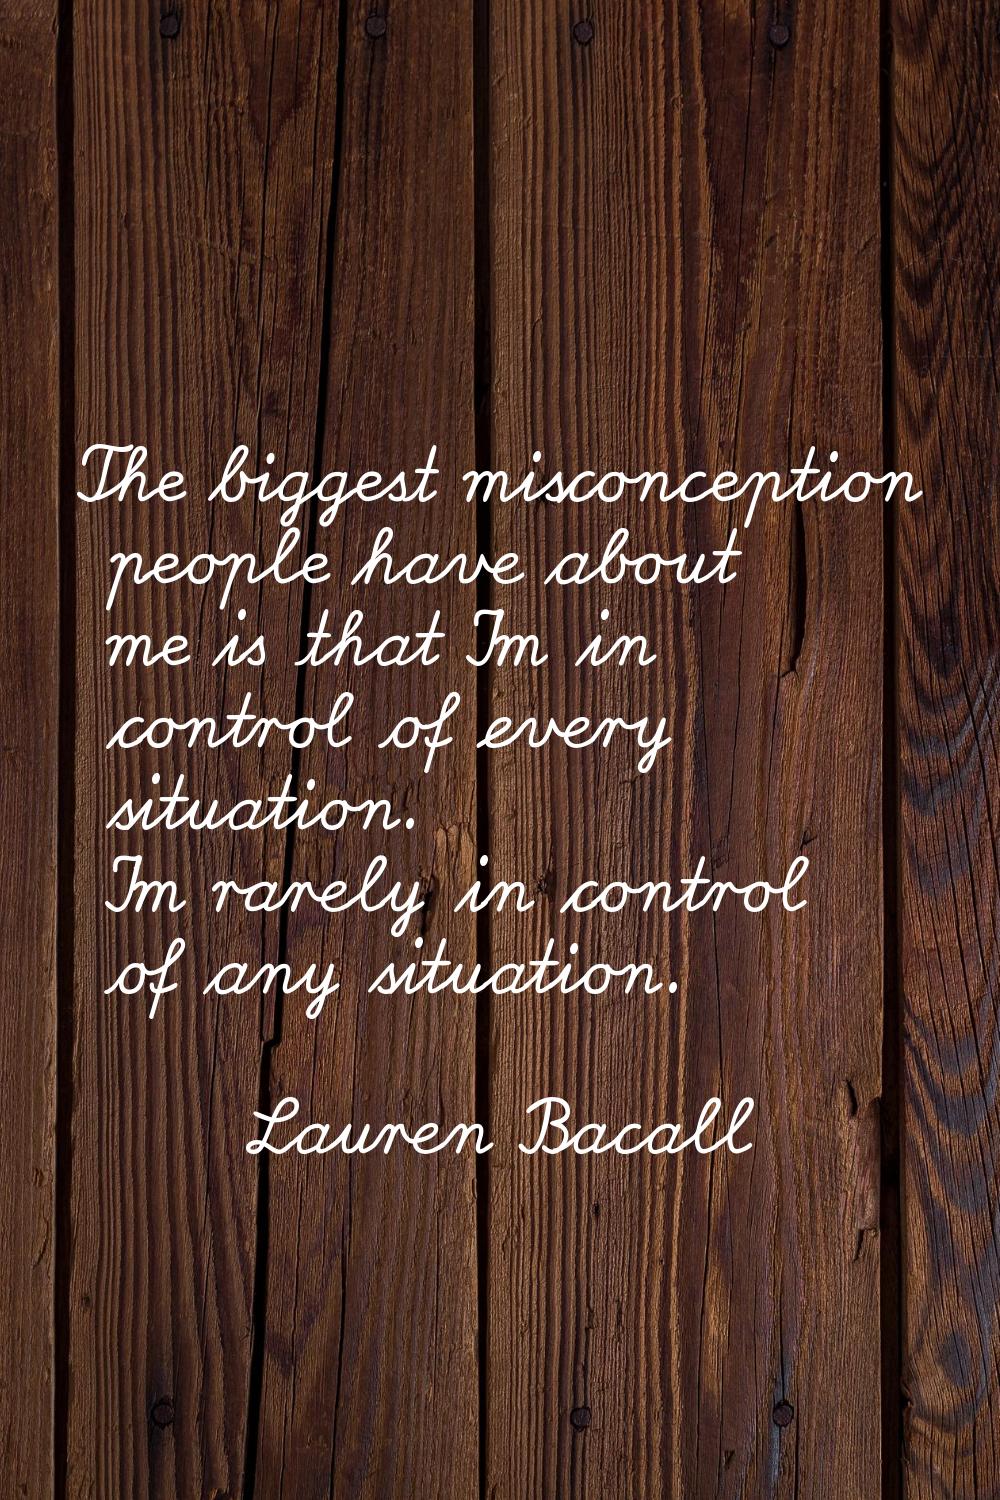 The biggest misconception people have about me is that I'm in control of every situation. I'm rarel